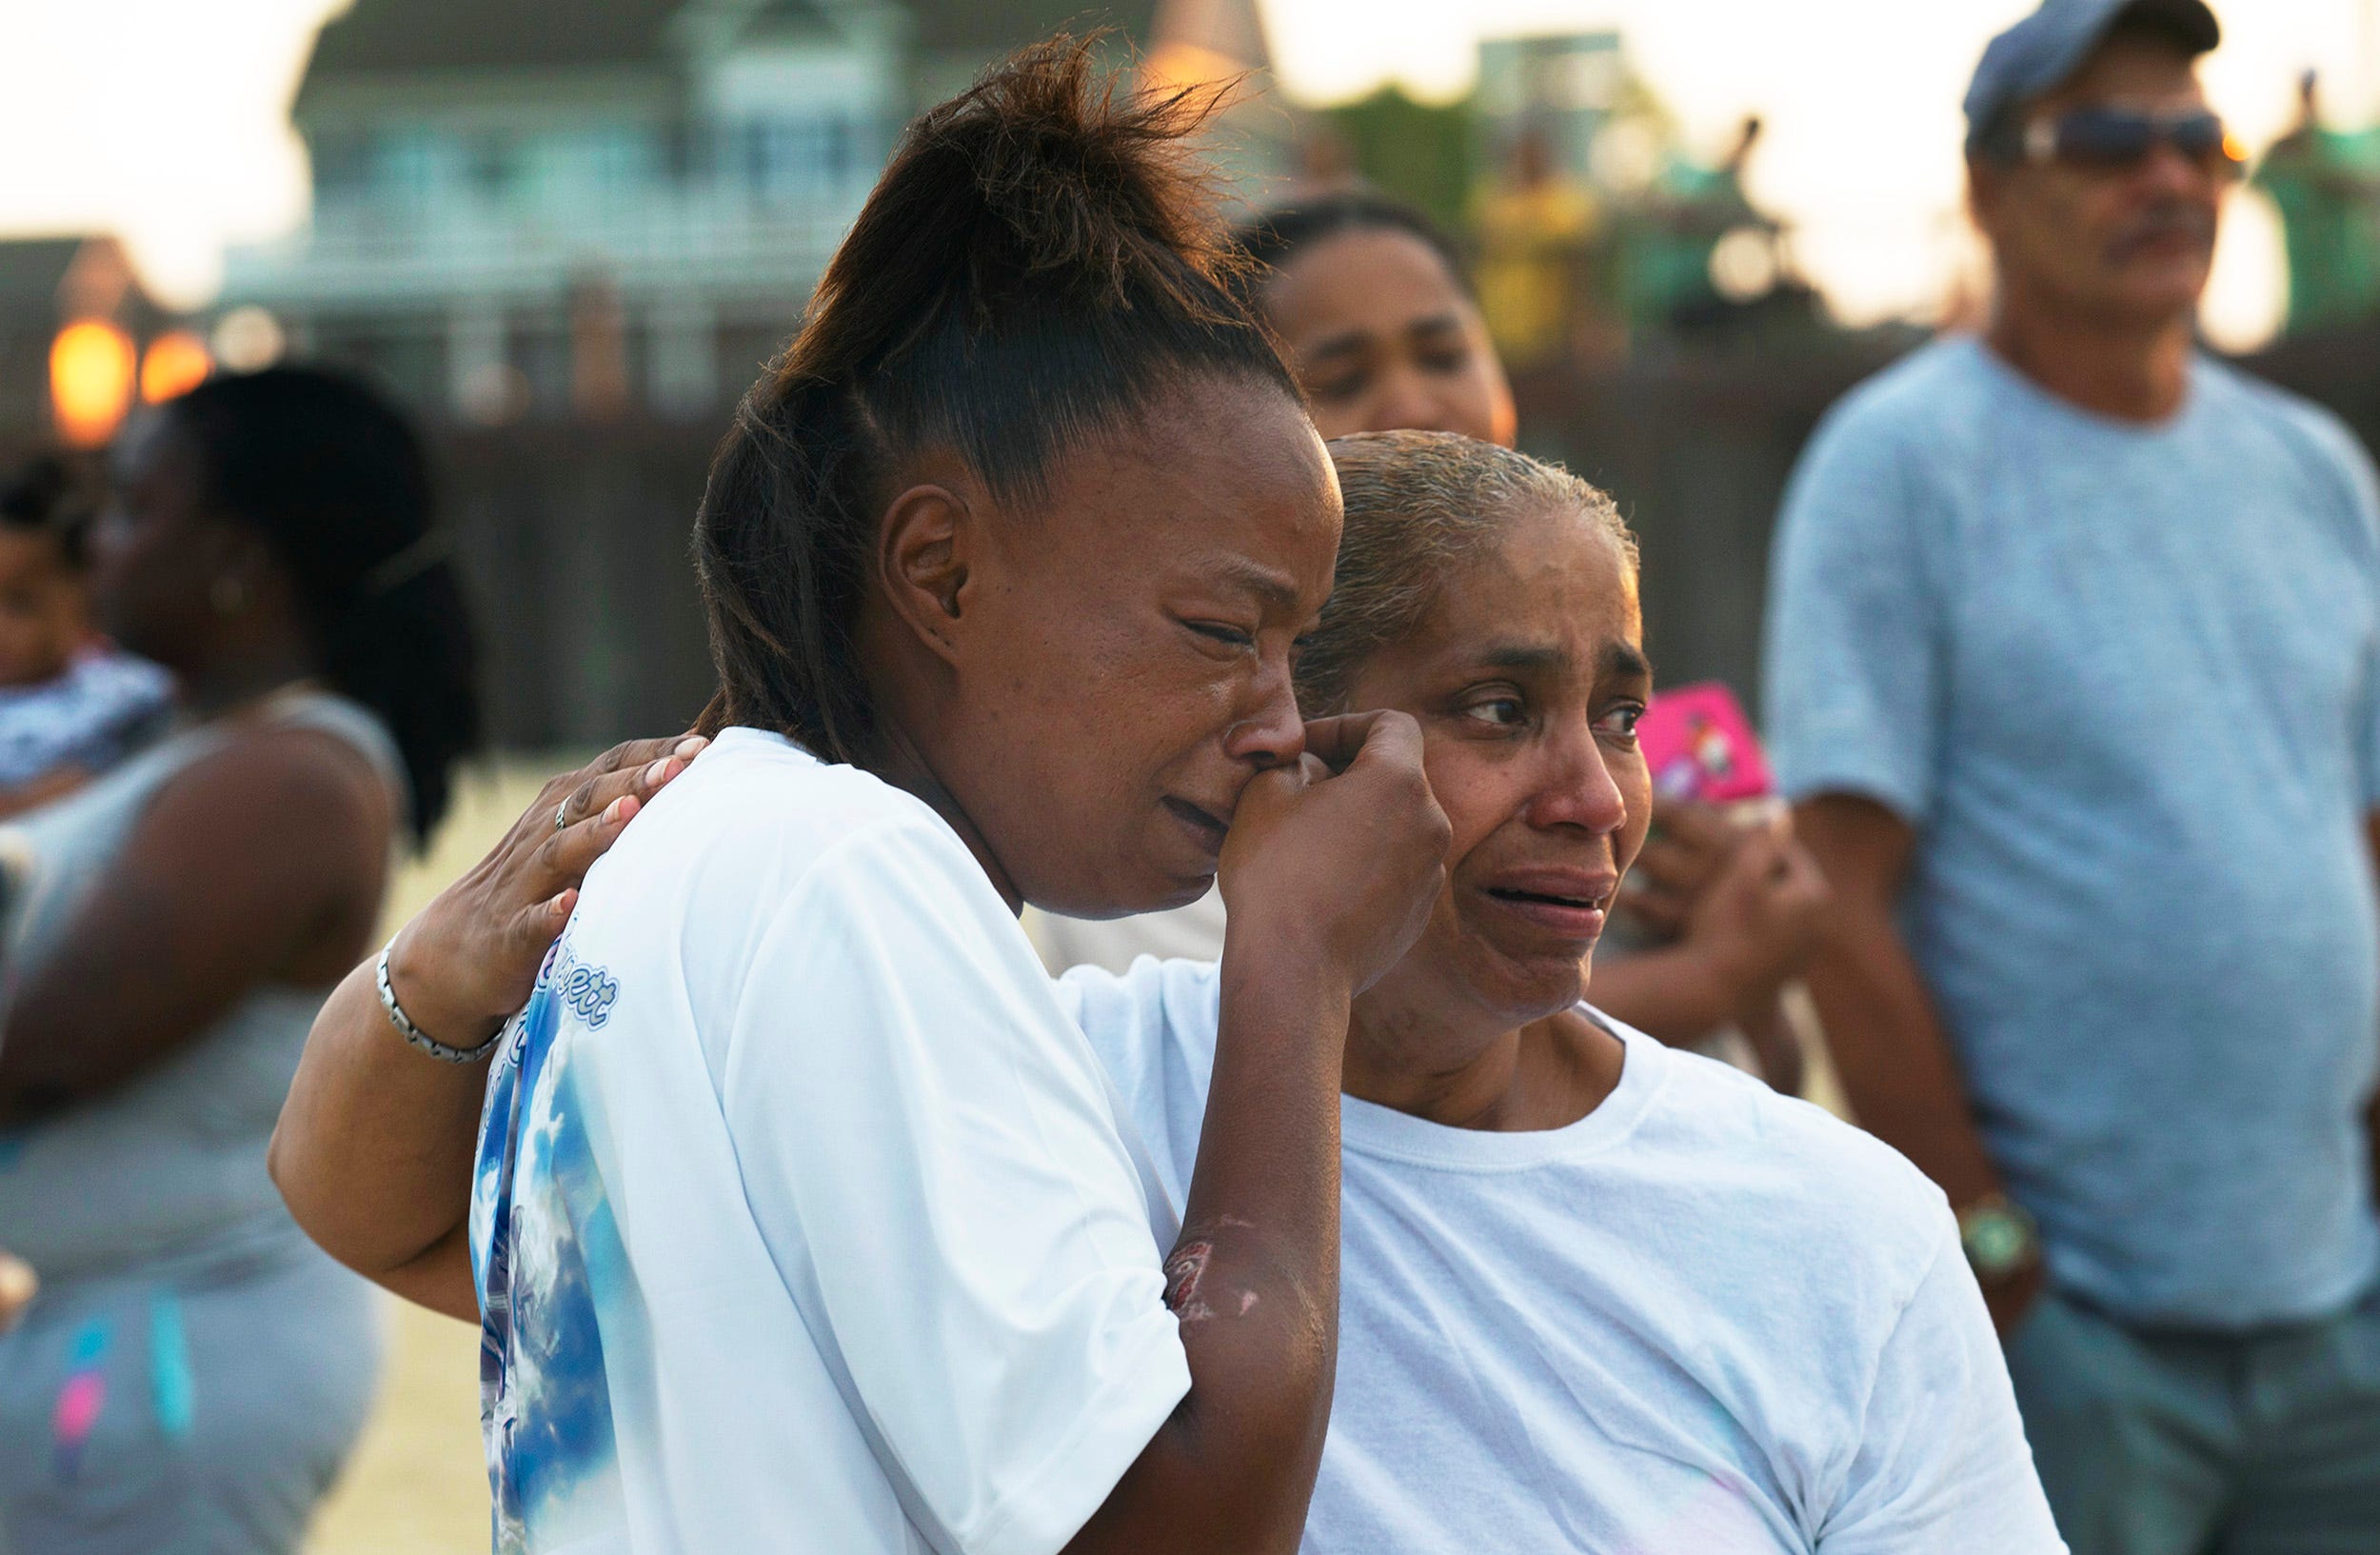 Thirty years after their sister drowned, they finally return to the beach